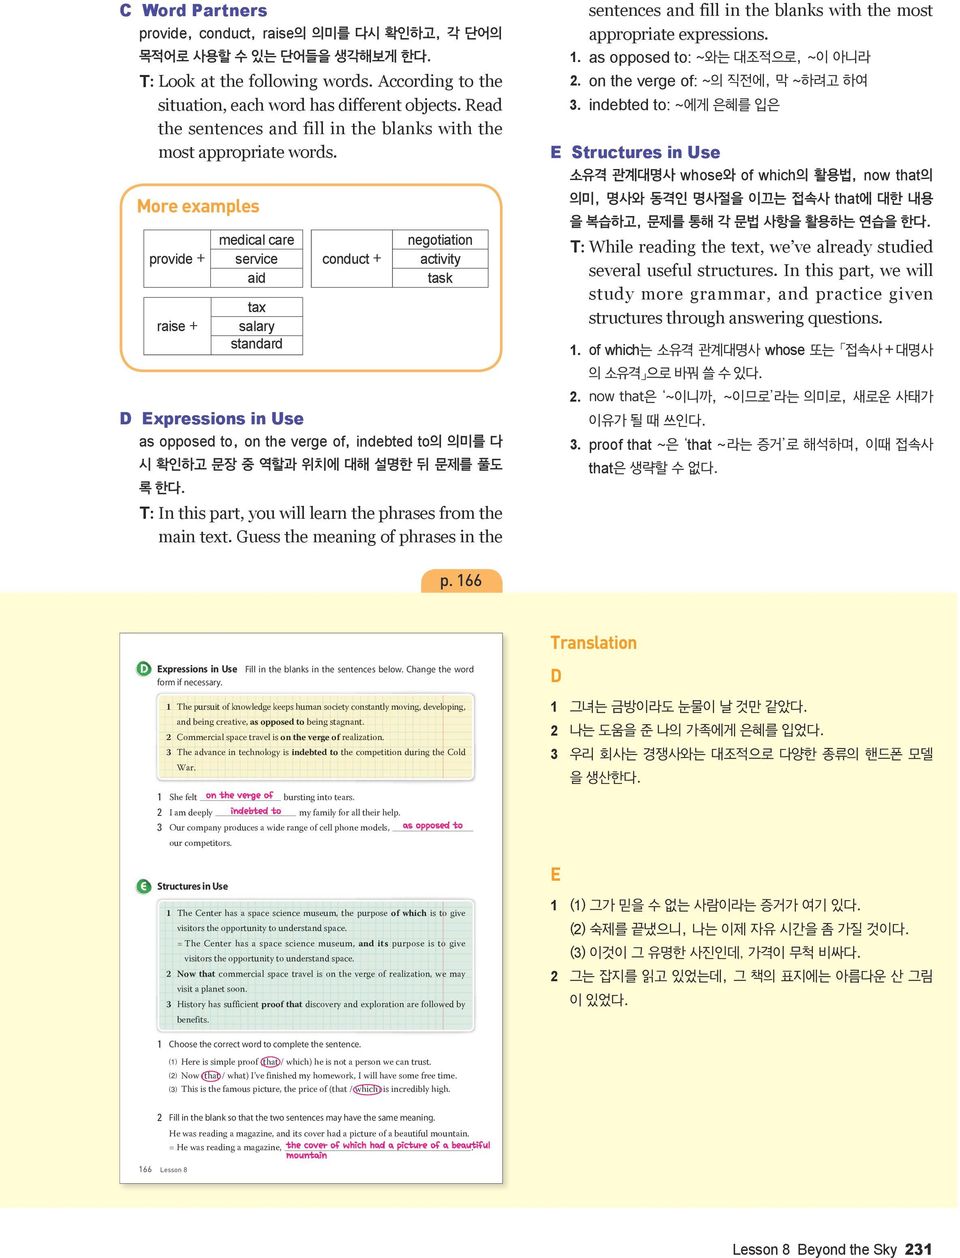 More examples provide + raise + medical care service aid tax salary standard conduct + negotiation activity task D Expressions in Use as opposed to, on the verge of, indebted to의 의미를 다 시 확인하고 문장 중